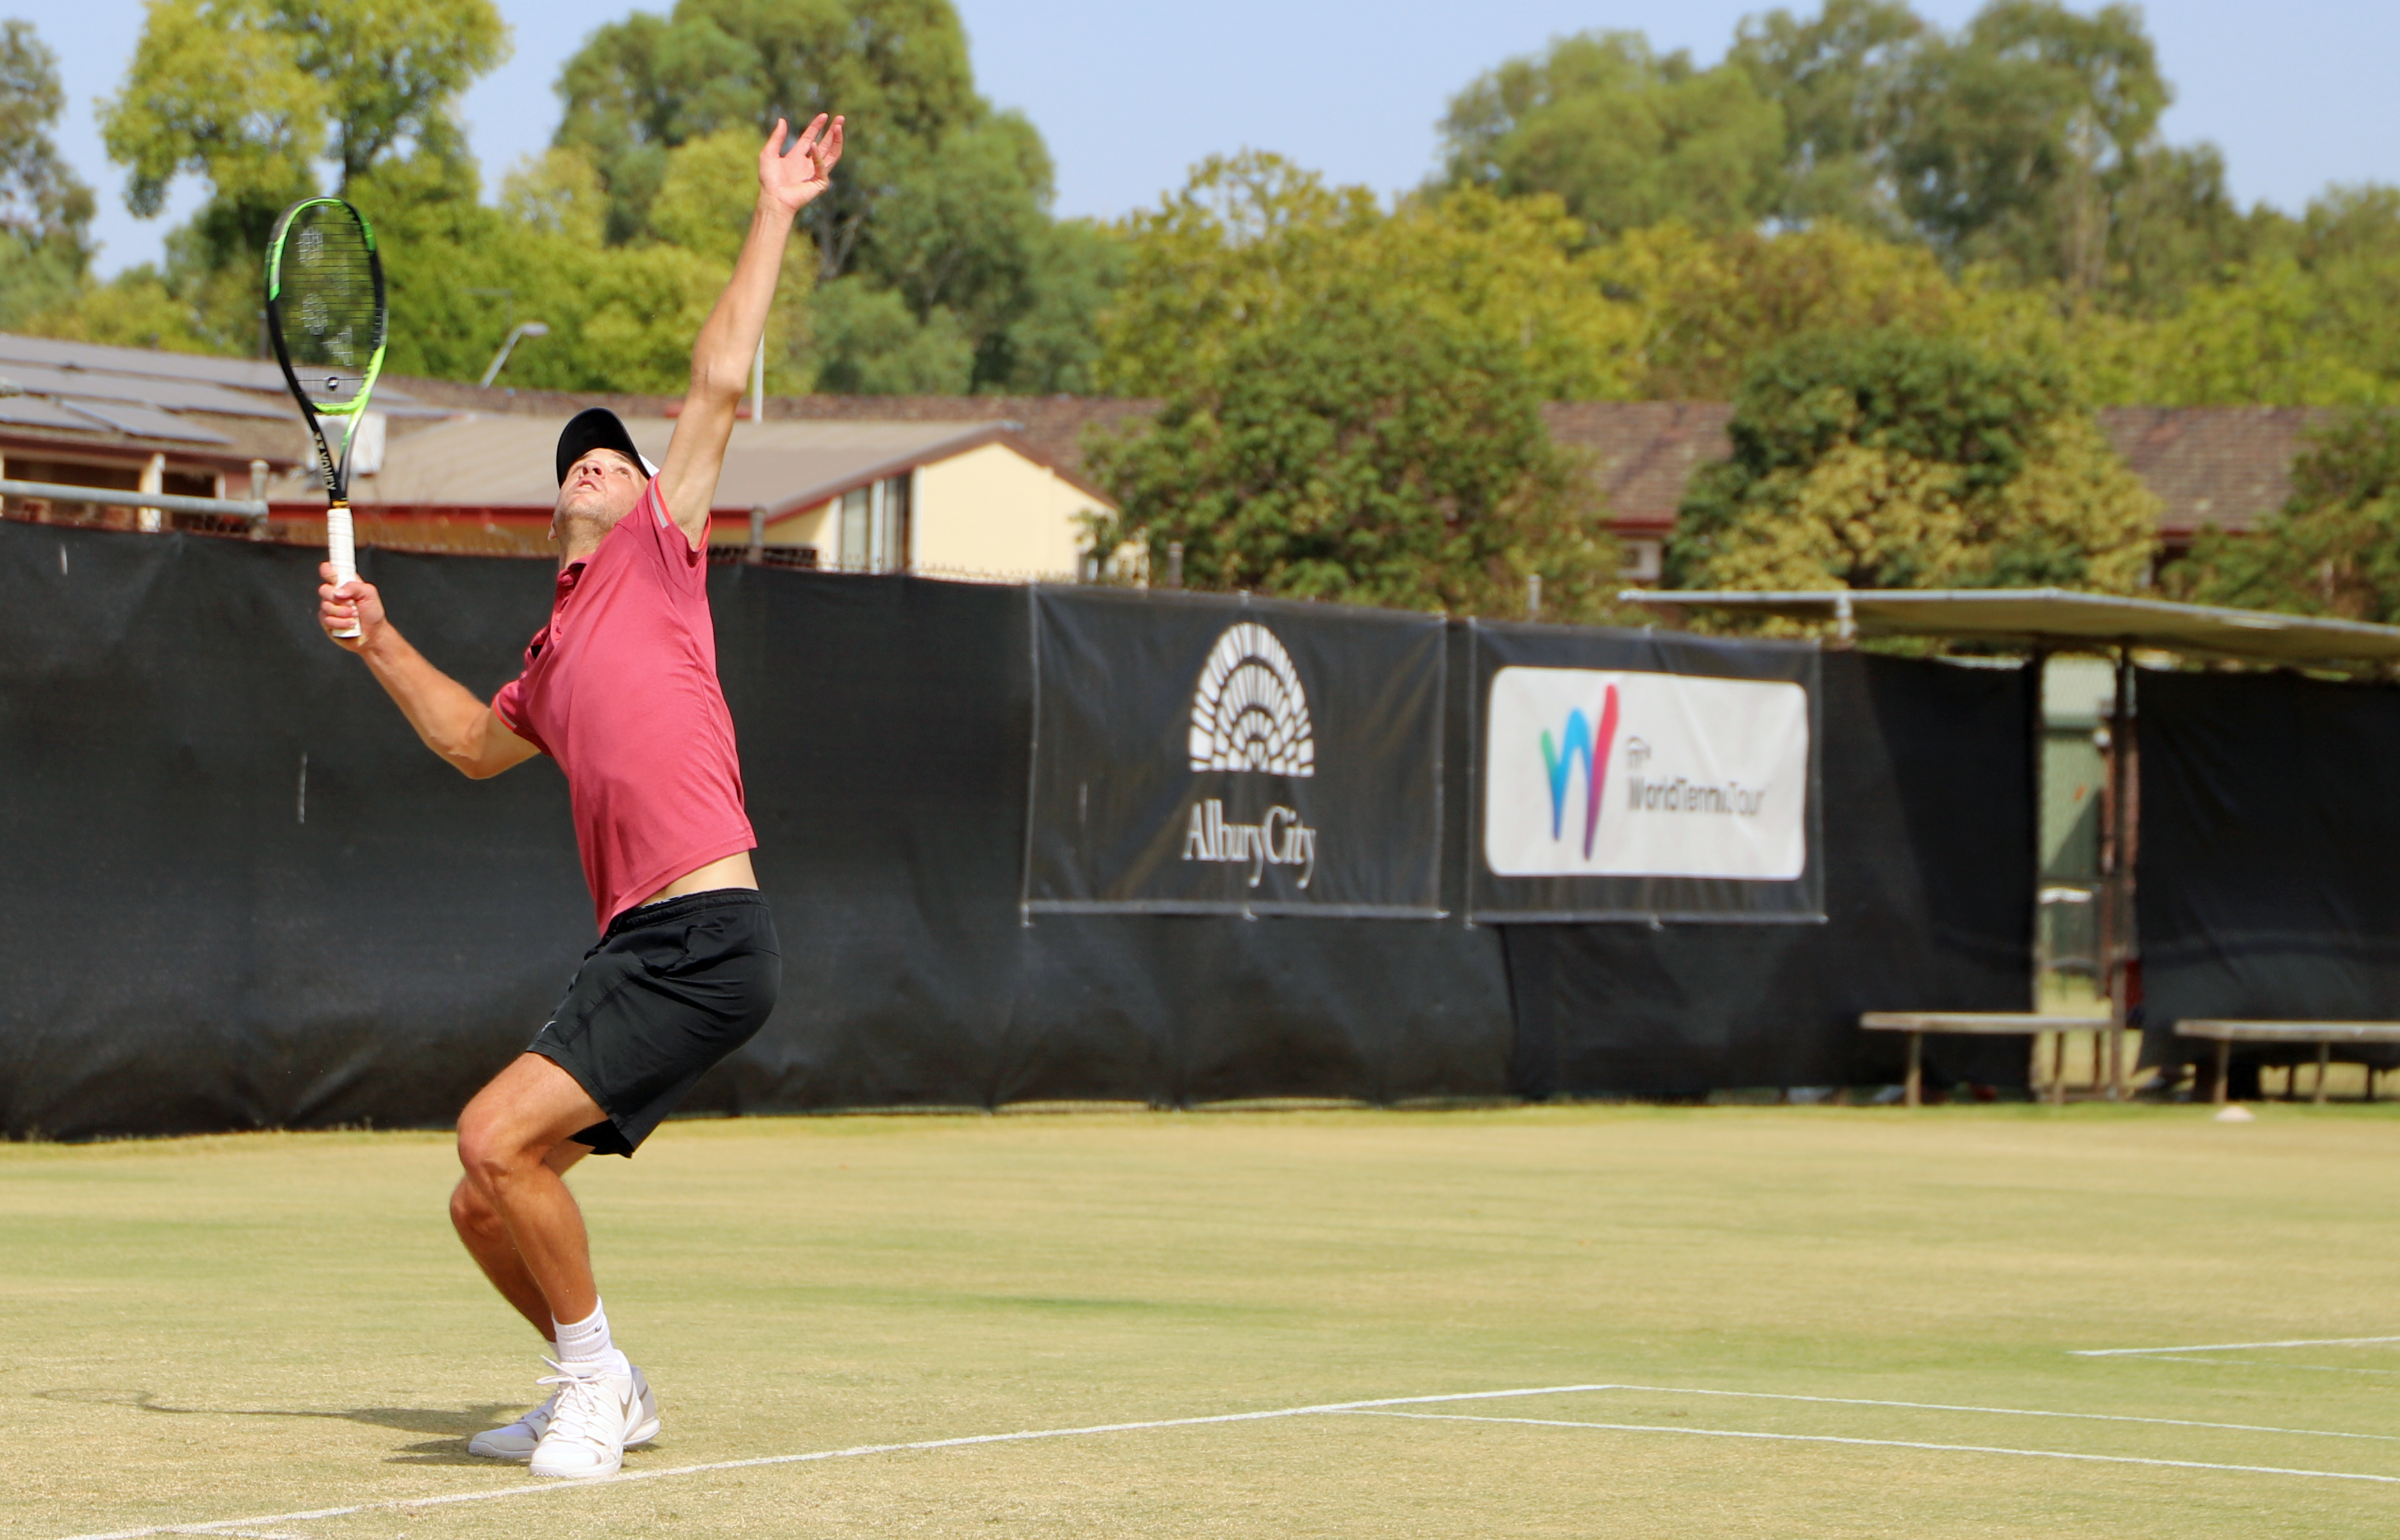 Romios into Albury semis 1 March, 2019 All News News and Features News and Events Tennis Australia